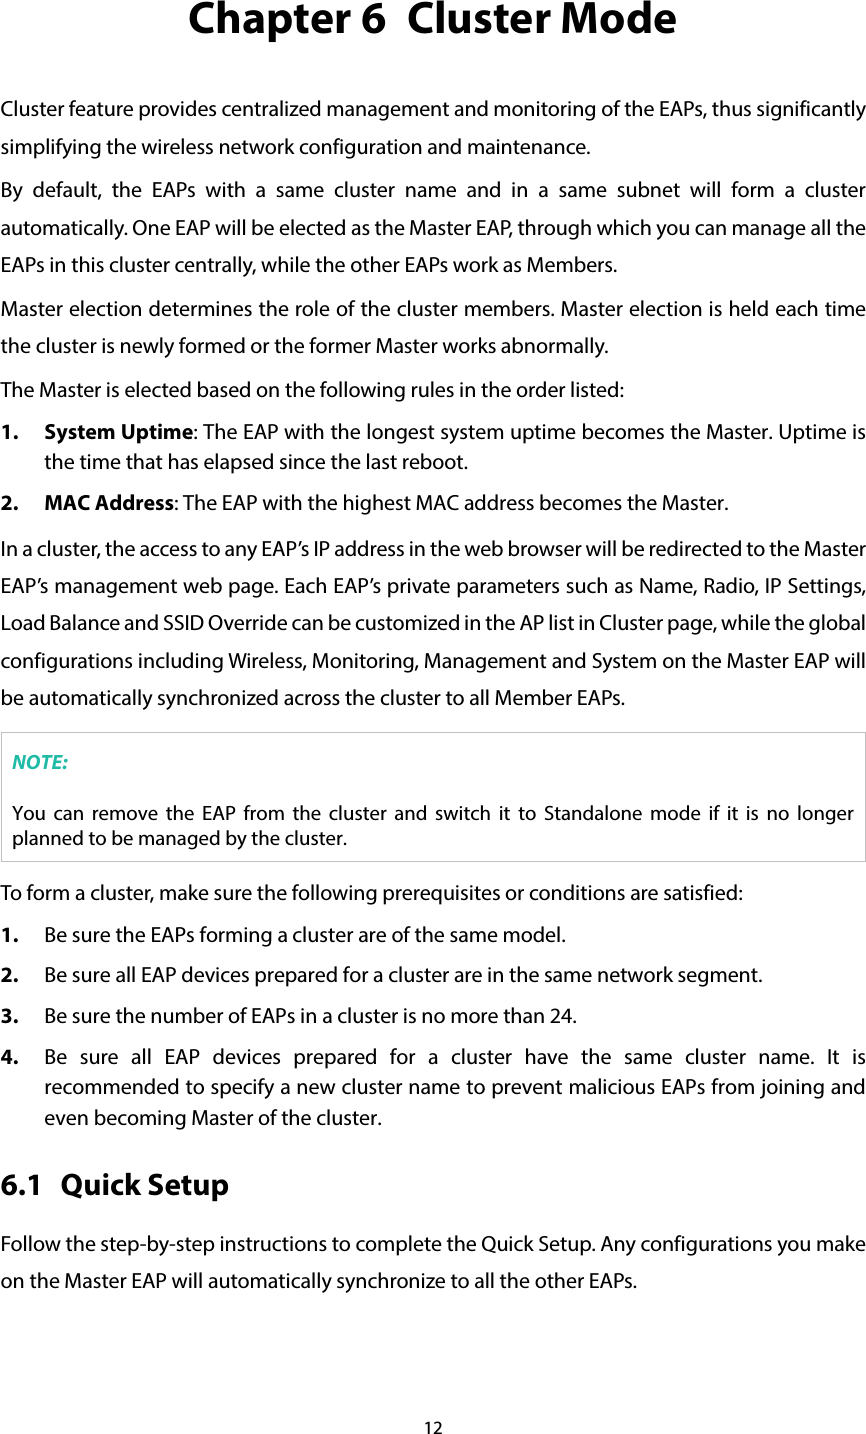 12 Chapter 6  Cluster Mode Cluster feature provides centralized management and monitoring of the EAPs, thus significantly simplifying the wireless network configuration and maintenance. By default, the EAPs  with a same cluster name and in a same subnet will form a cluster automatically. One EAP will be elected as the Master EAP, through which you can manage all the EAPs in this cluster centrally, while the other EAPs work as Members. Master election determines the role of the cluster members. Master election is held each time the cluster is newly formed or the former Master works abnormally. The Master is elected based on the following rules in the order listed:   1. System Uptime: The EAP with the longest system uptime becomes the Master. Uptime is the time that has elapsed since the last reboot. 2. MAC Address: The EAP with the highest MAC address becomes the Master. In a cluster, the access to any EAP’s IP address in the web browser will be redirected to the Master EAP’s management web page. Each EAP’s private parameters such as Name, Radio, IP Settings, Load Balance and SSID Override can be customized in the AP list in Cluster page, while the global configurations including Wireless, Monitoring, Management and System on the Master EAP will be automatically synchronized across the cluster to all Member EAPs. NOTE: You can remove the EAP from the cluster and switch it to Standalone mode if it is no longer planned to be managed by the cluster. To form a cluster, make sure the following prerequisites or conditions are satisfied: 1. Be sure the EAPs forming a cluster are of the same model. 2. Be sure all EAP devices prepared for a cluster are in the same network segment. 3. Be sure the number of EAPs in a cluster is no more than 24. 4. Be sure all EAP devices prepared for a cluster have the same cluster name. It is recommended to specify a new cluster name to prevent malicious EAPs from joining and even becoming Master of the cluster. 6.1 Quick Setup Follow the step-by-step instructions to complete the Quick Setup. Any configurations you make on the Master EAP will automatically synchronize to all the other EAPs. 